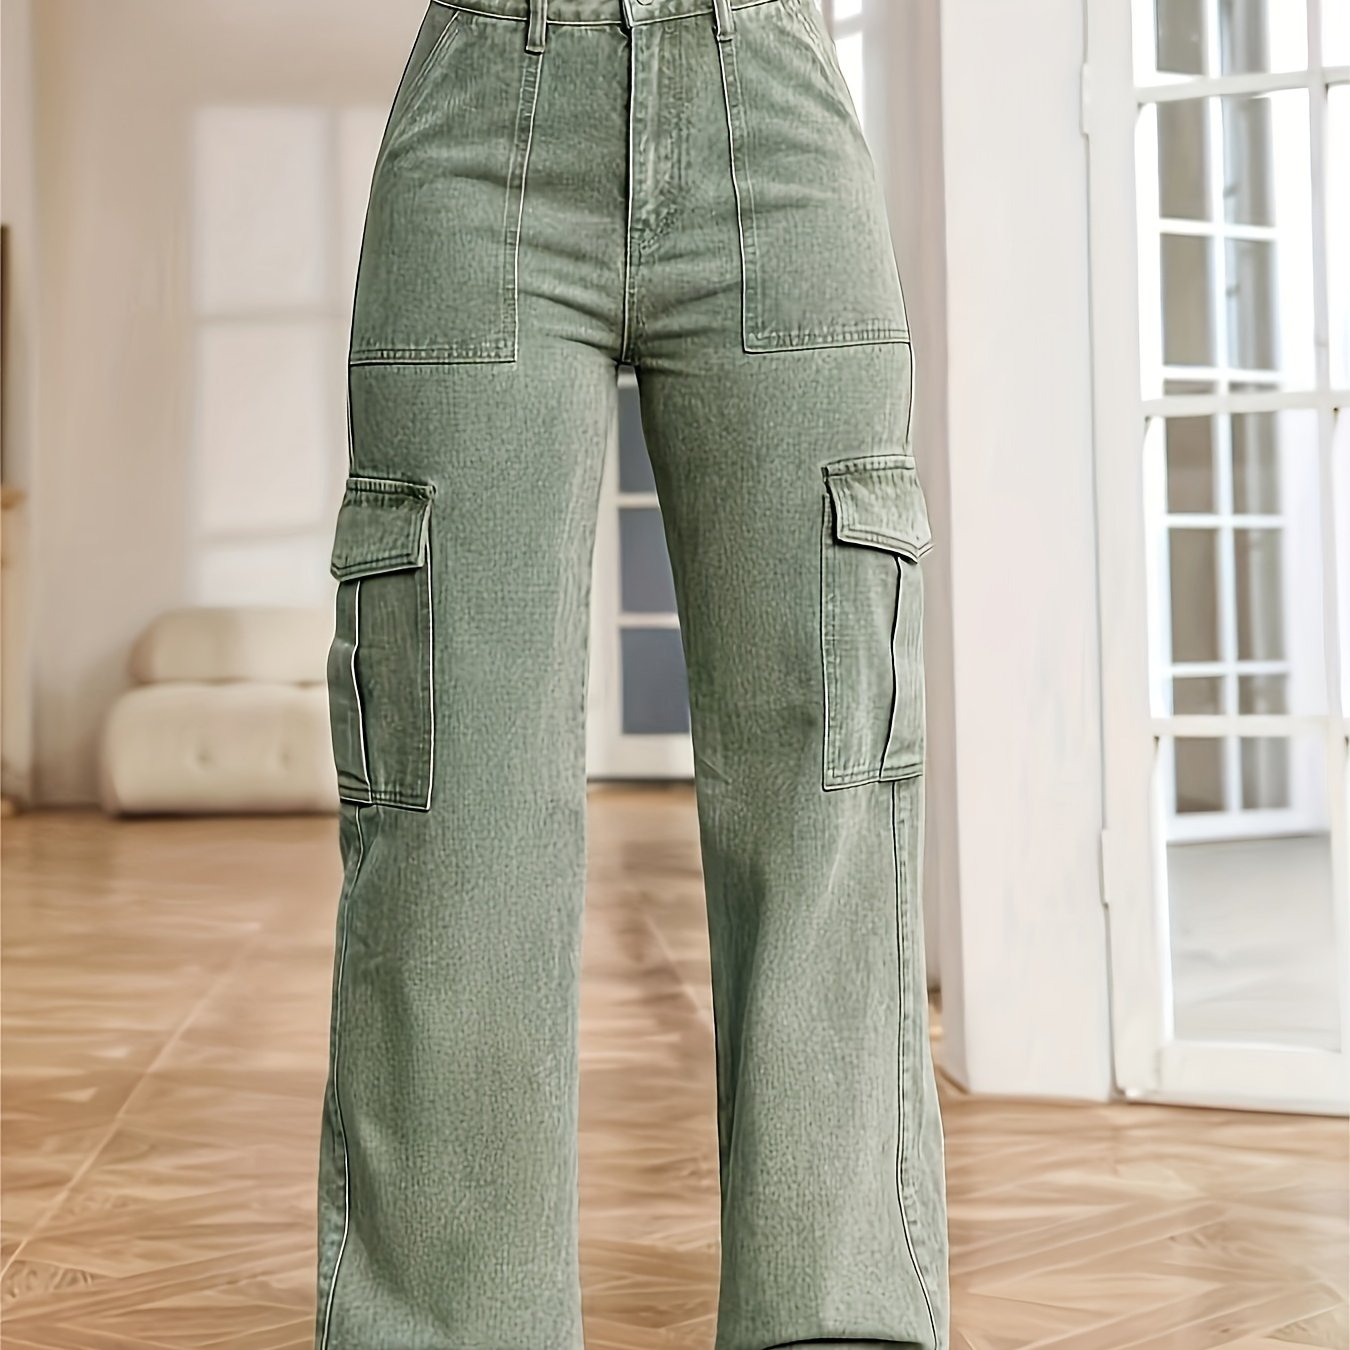 Washed Flap Pockets Cargo Pants, Loose Fit Y2K & Kpop Style Straight Jeans, Women's Denim Jeans & Clothing - LESSANA